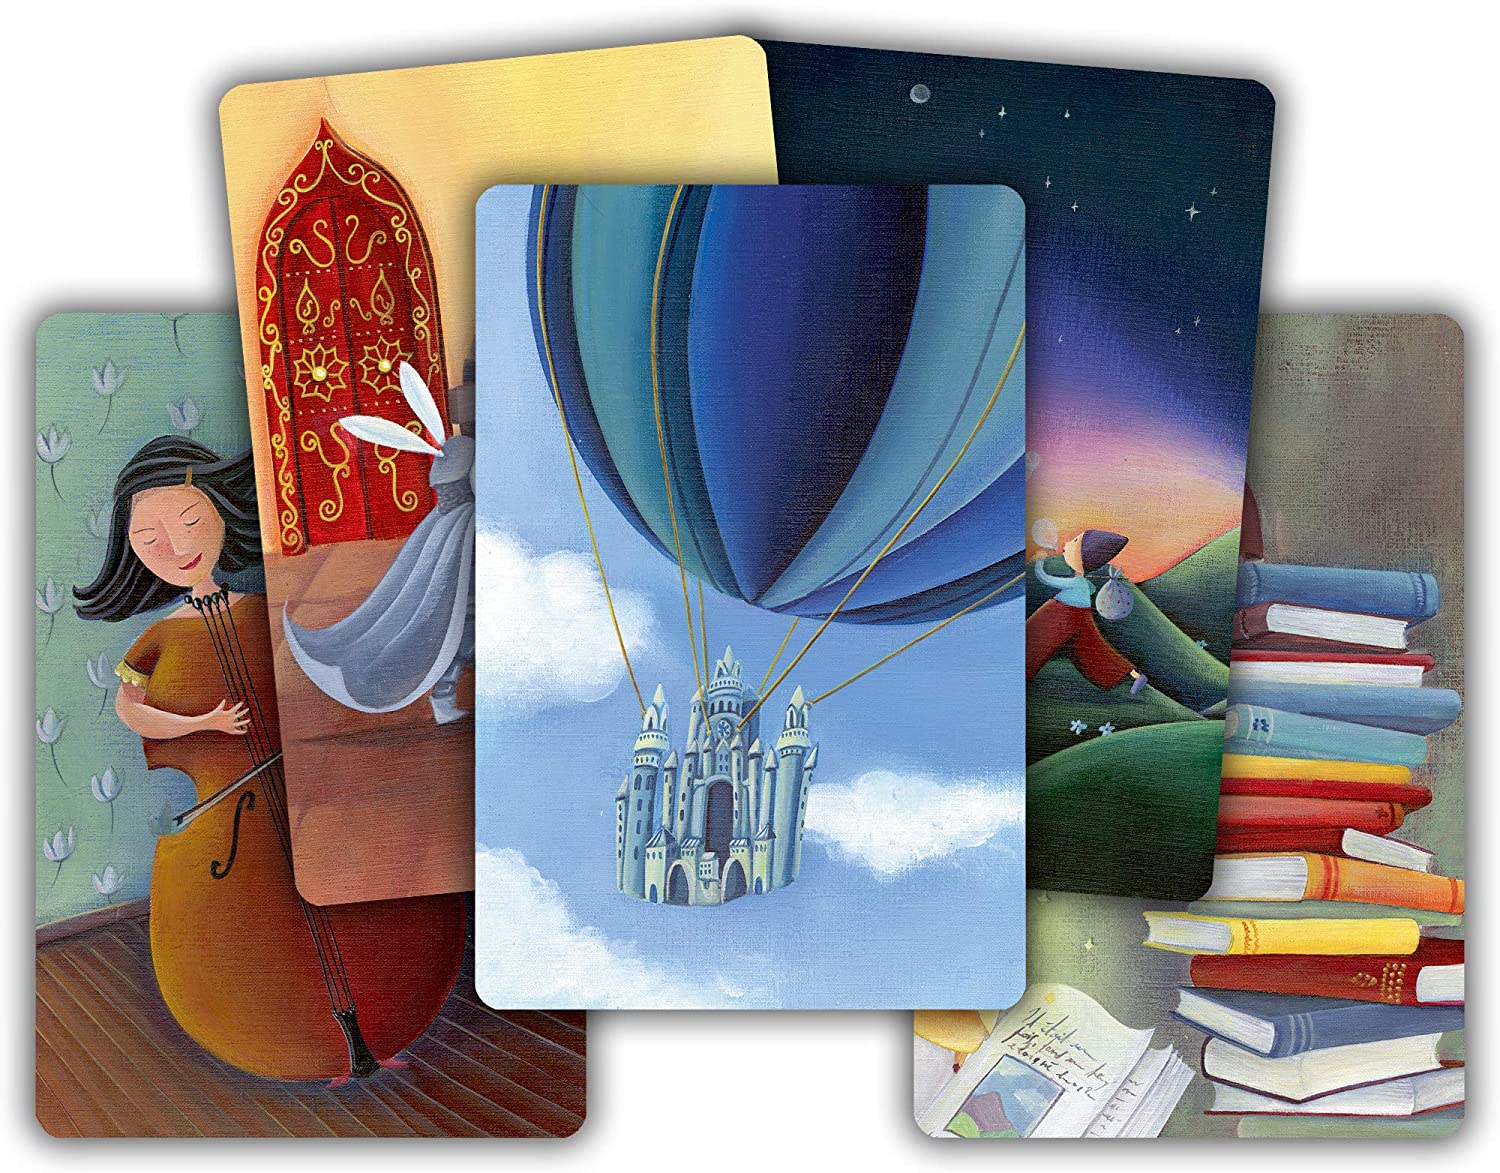 The illustrations by Marie Cardouat, author of the Dixit cards